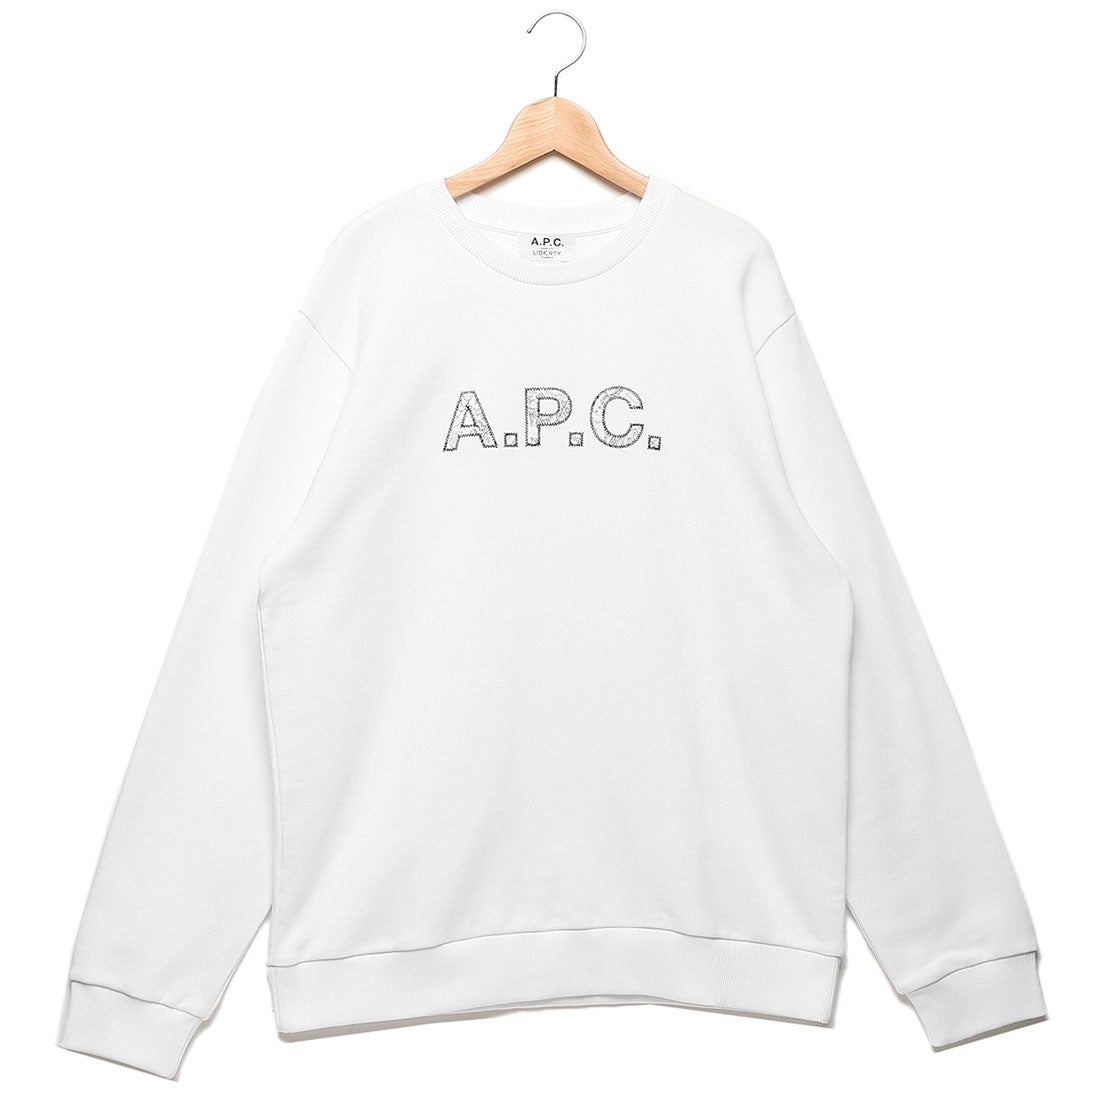 A.P.C. トップス